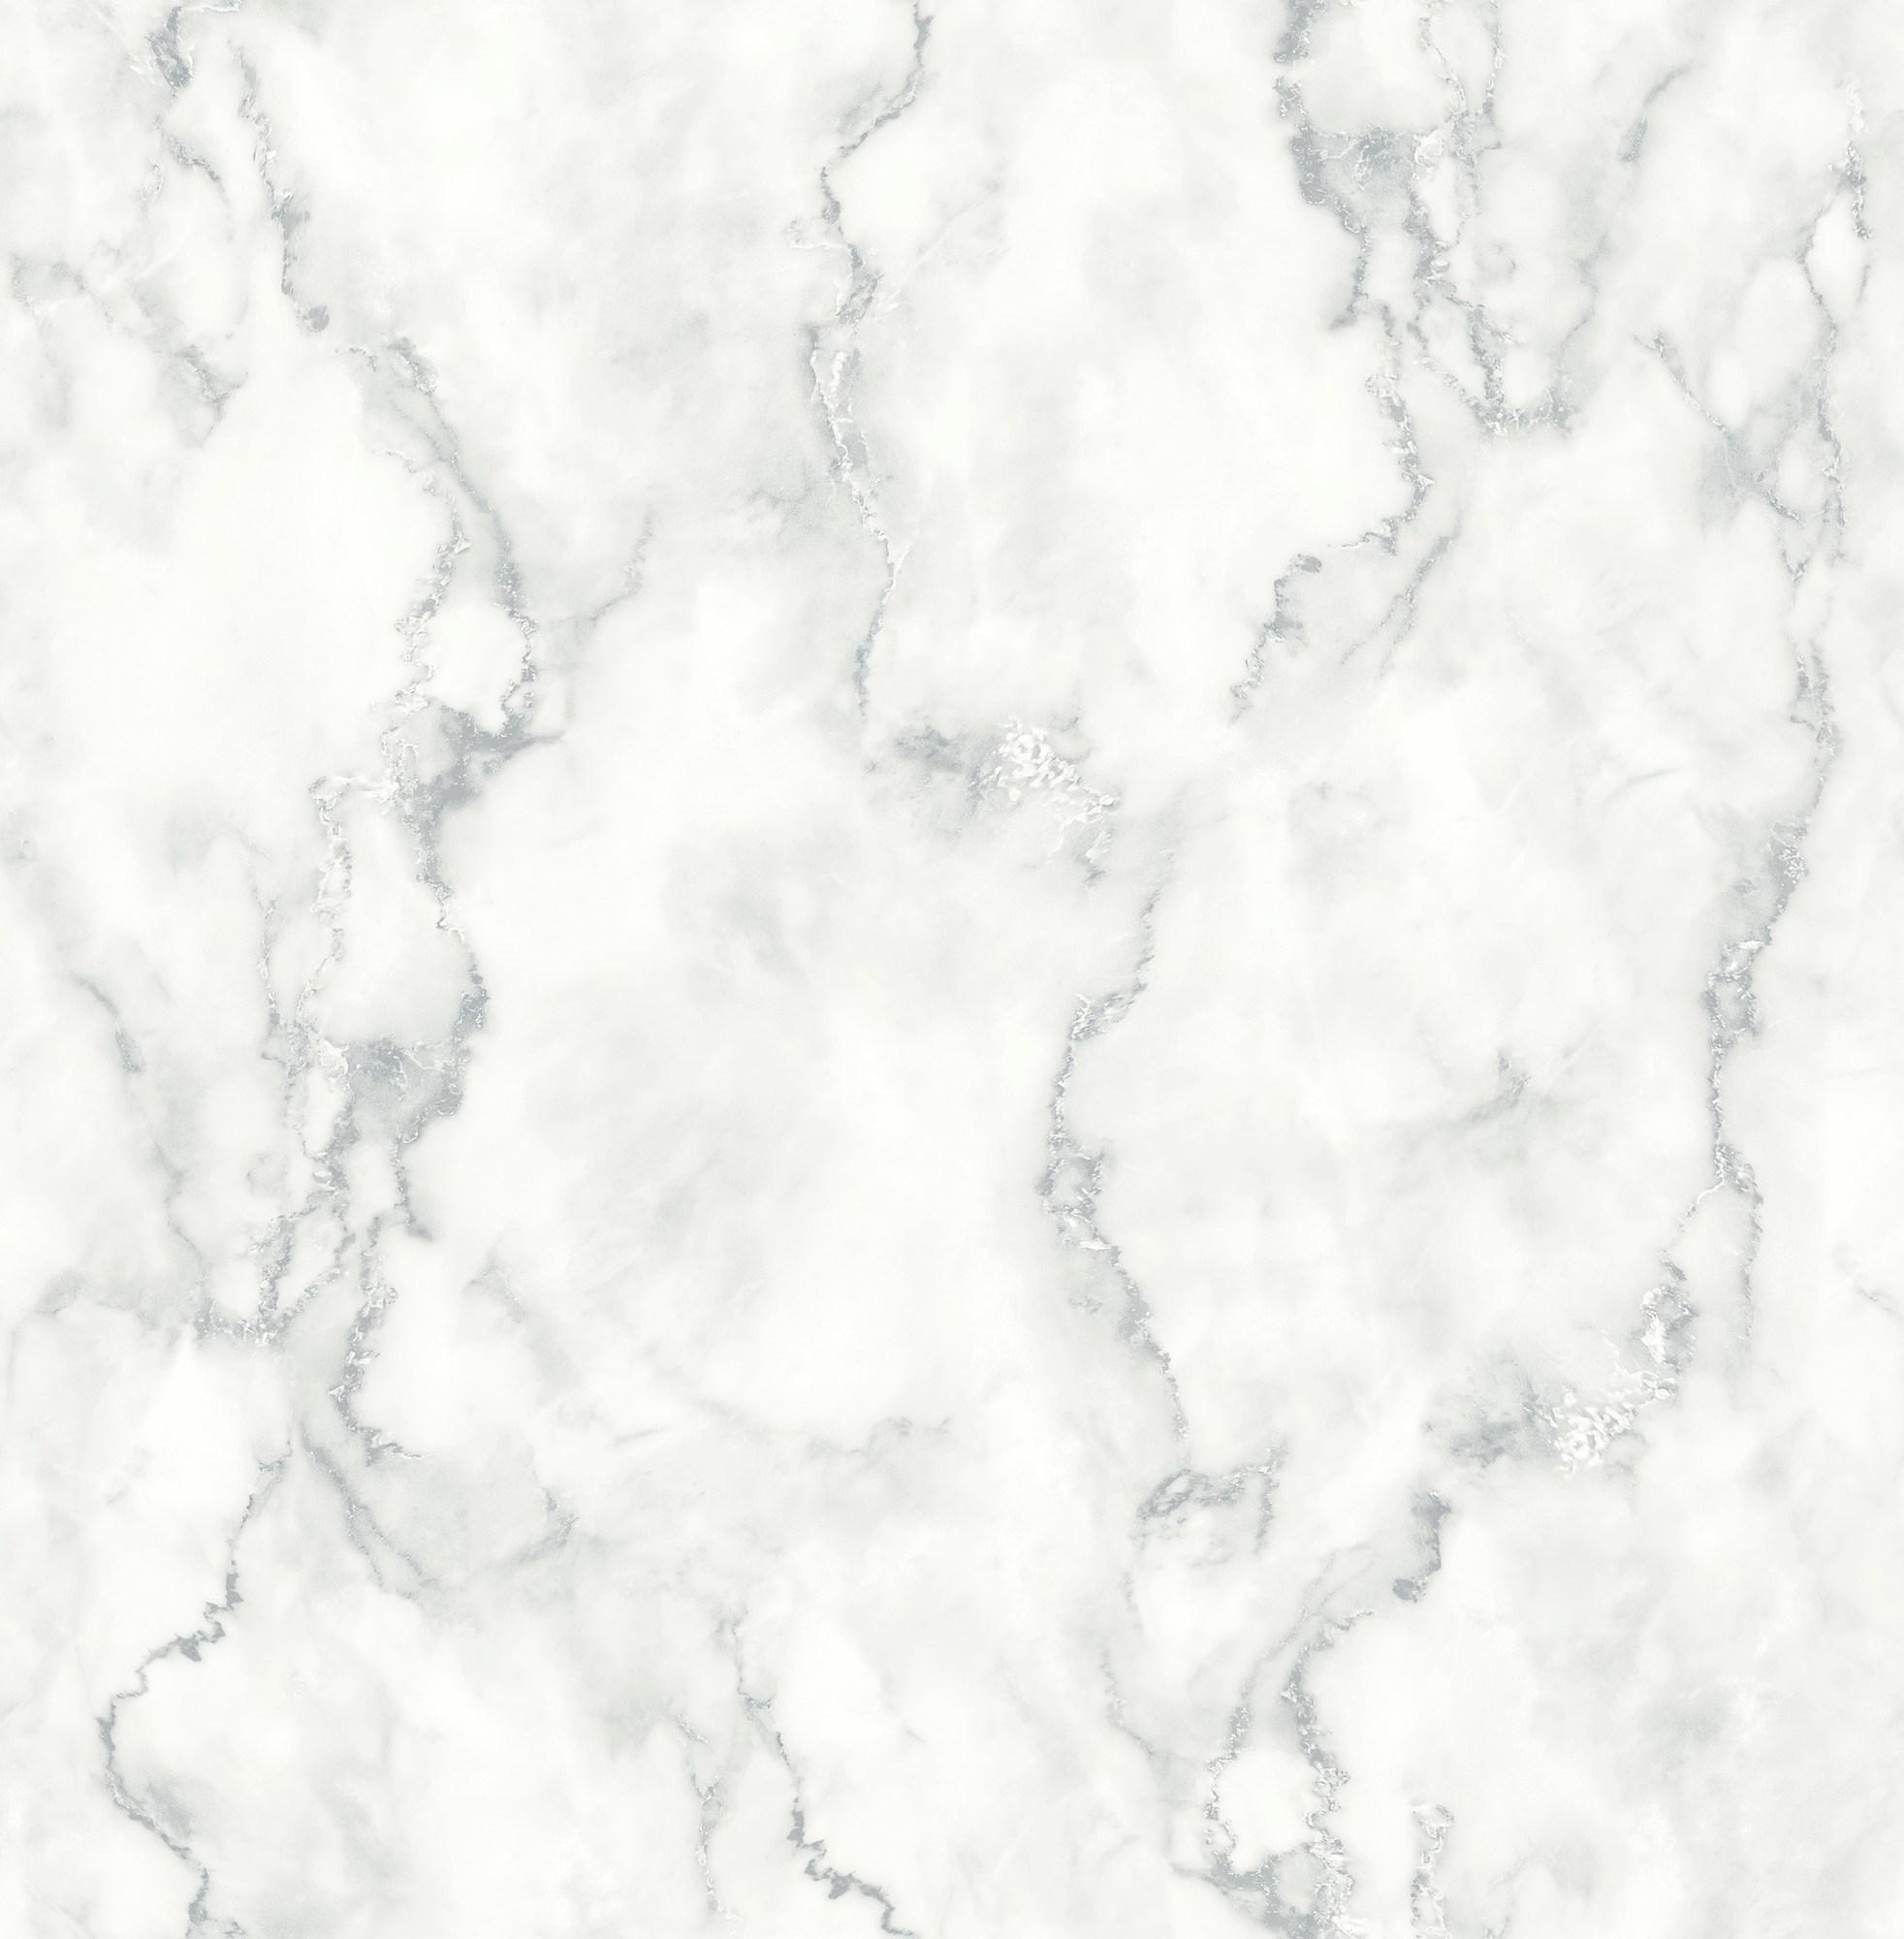 1964 x 2000 · jpeg - NextWall NW30400 Faux Marble Texture Peel and Stick Wallpaper White ...